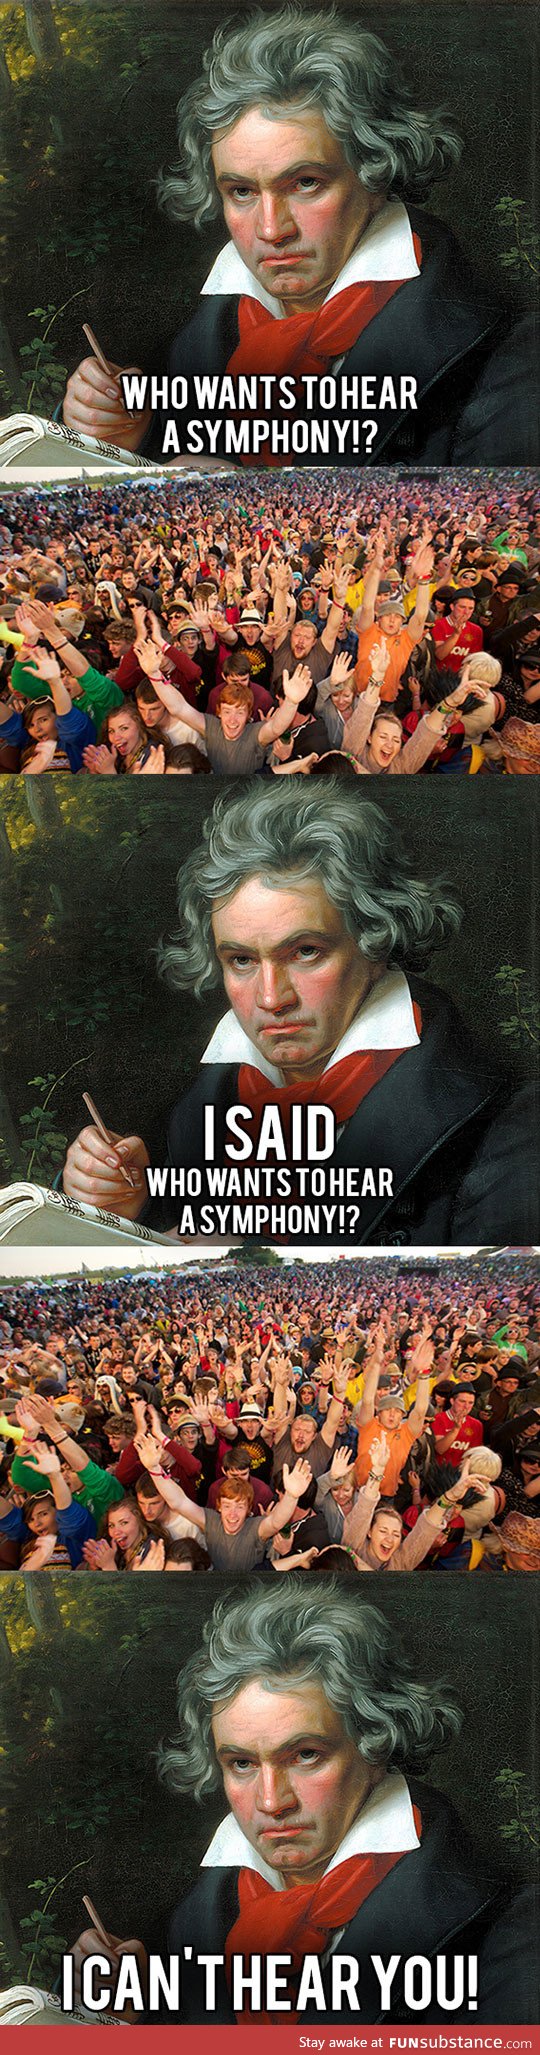 Beethoven's Tenth Symphony